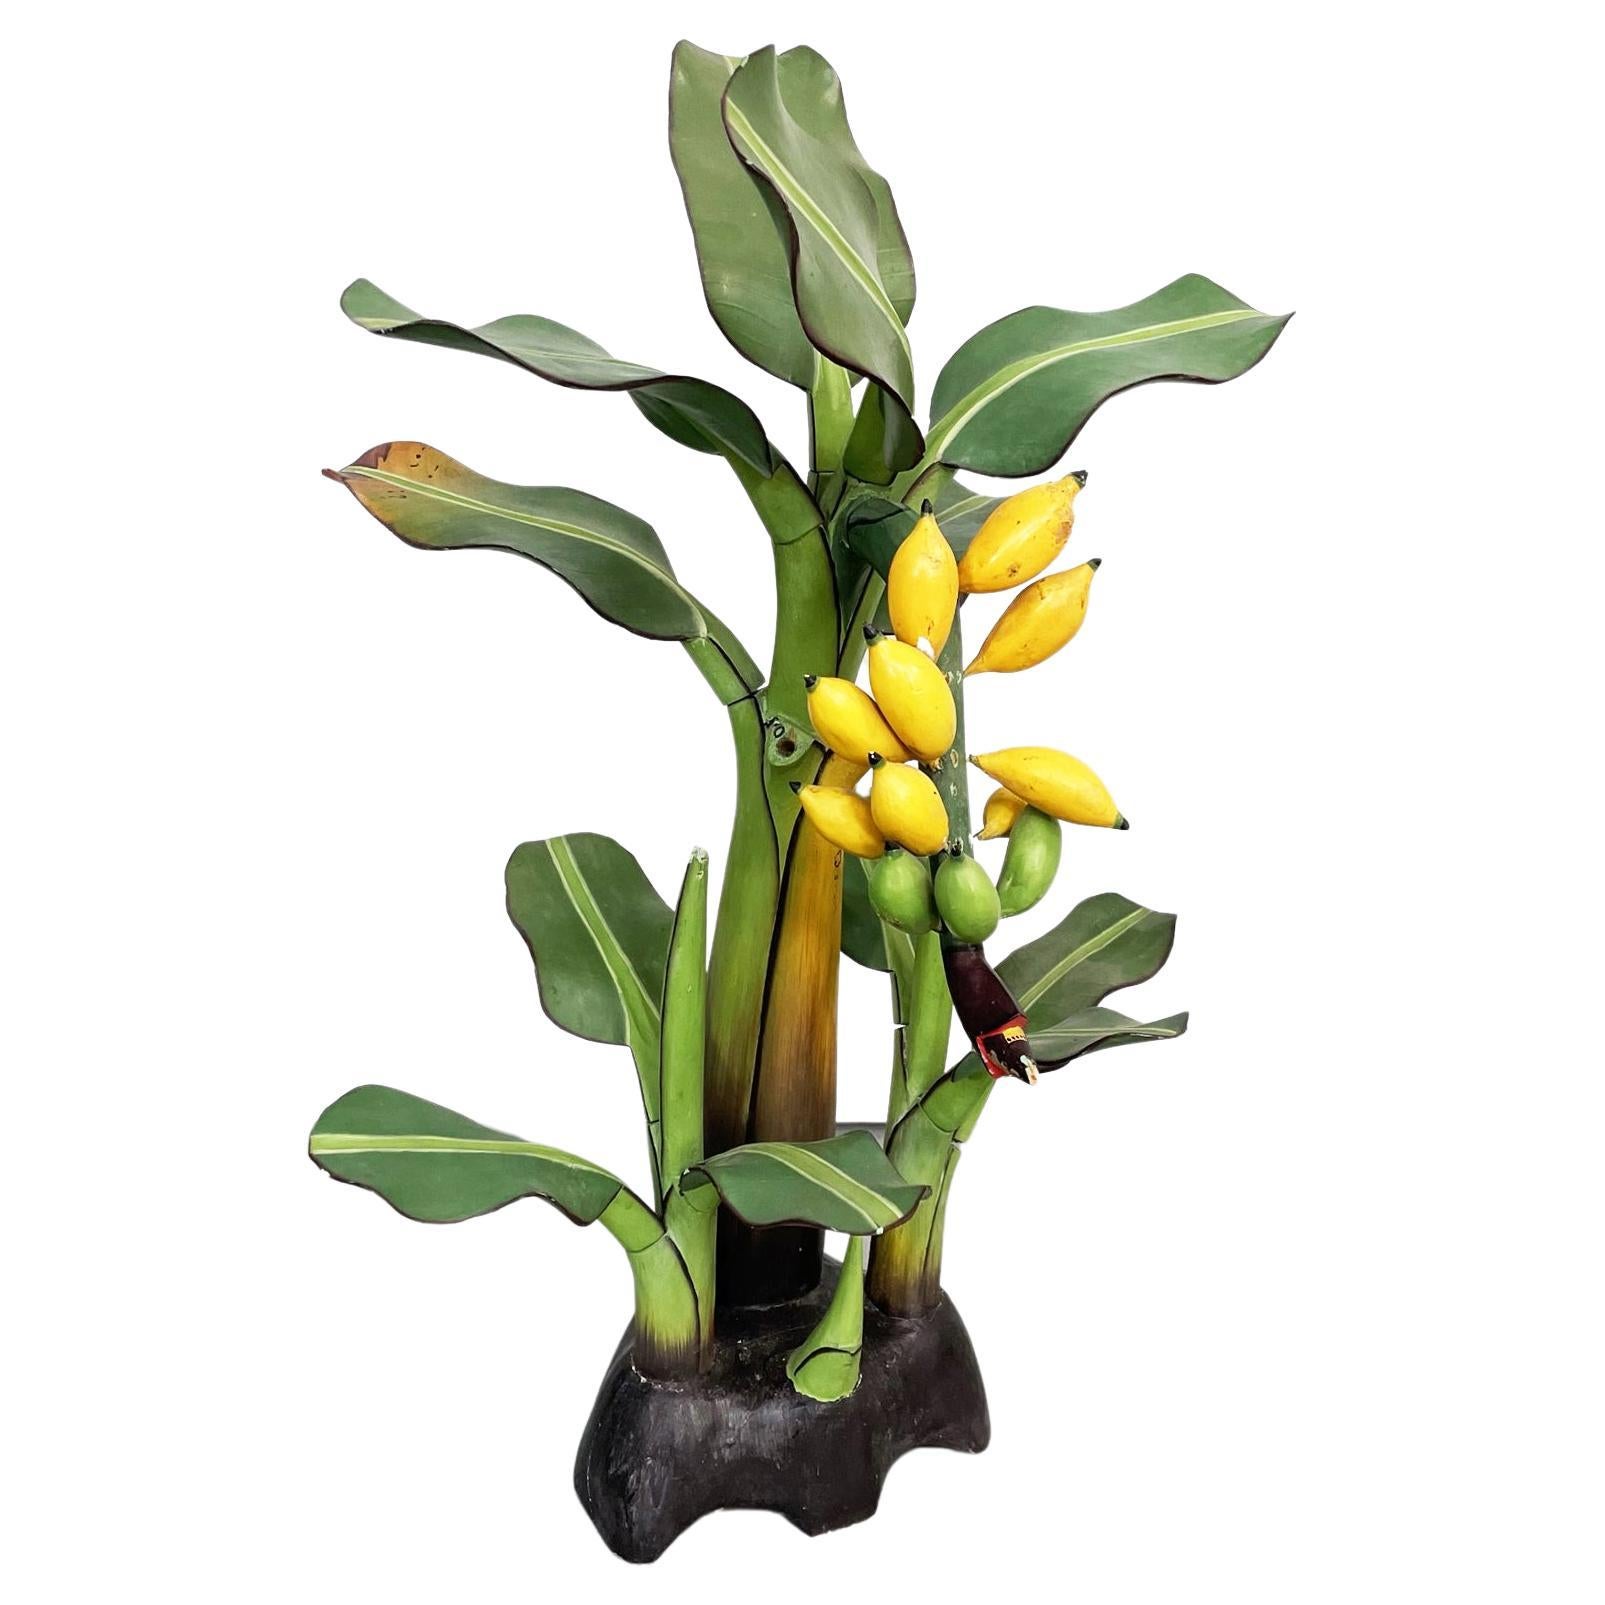 Italian Mid-Century Modern Wooden Sculpture of a Banana Plant, 1950s For Sale